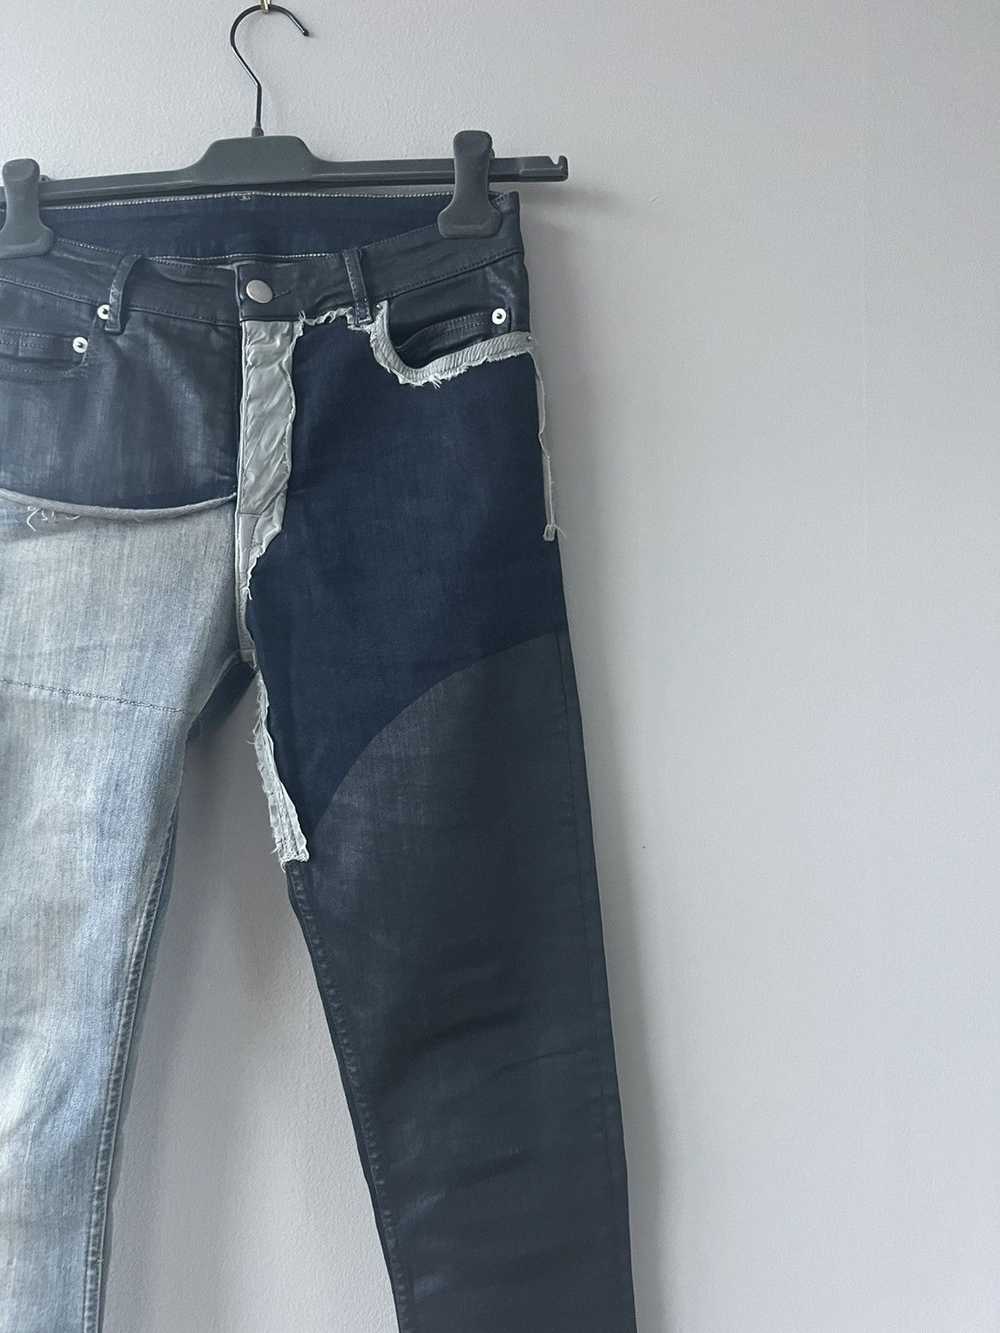 Rick Owens SS19 BABEL Combo Tyrone Jeans - image 3